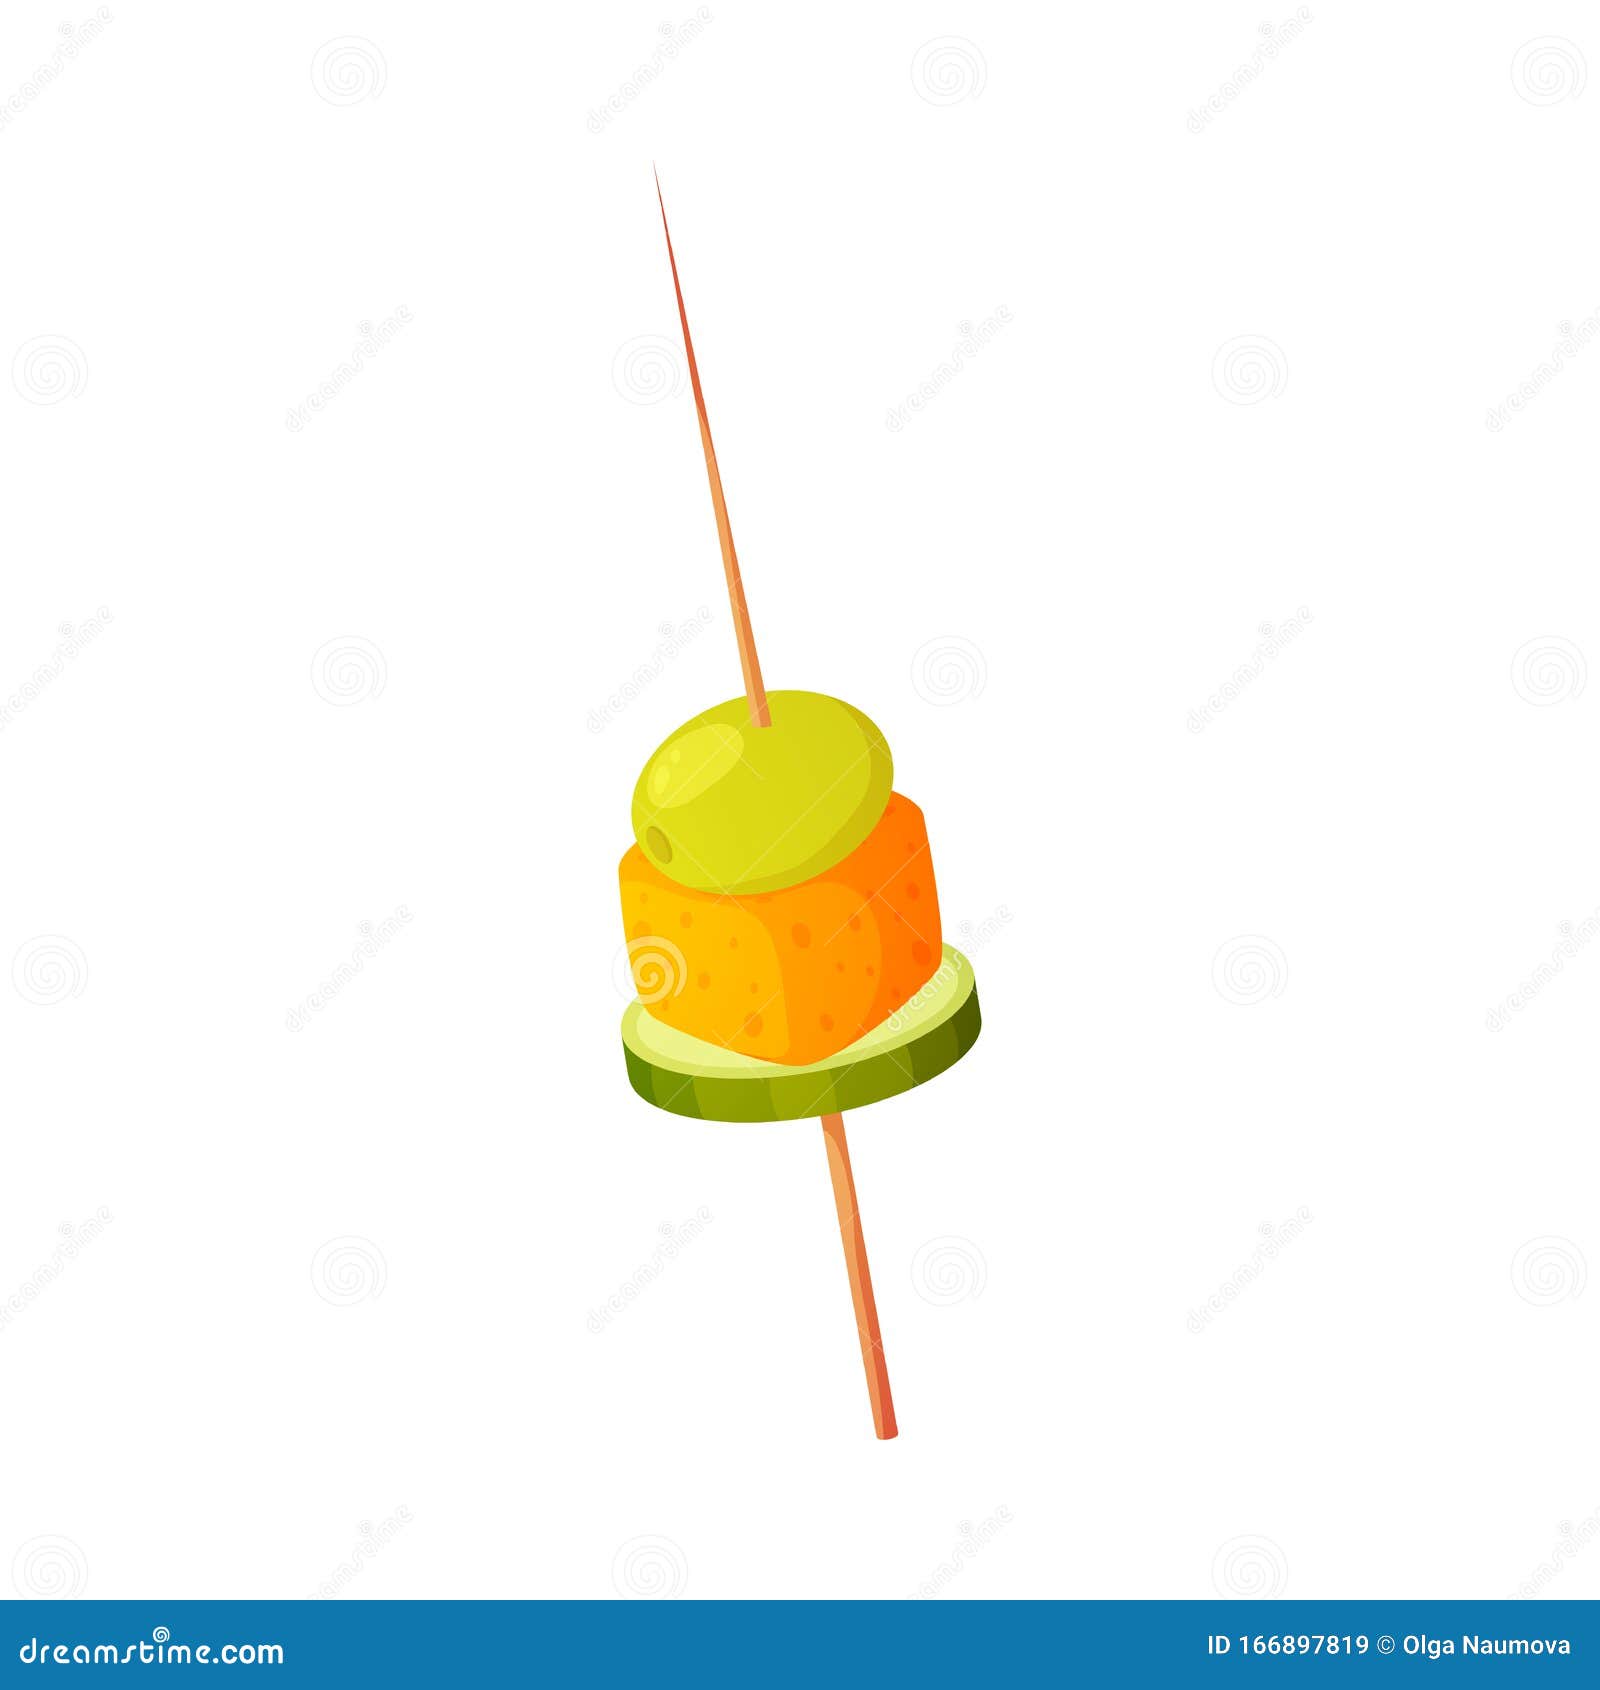 https://thumbs.dreamstime.com/z/appetizer-cucumber-cheese-olive-vector-illustration-hand-drawn-gourmet-wooden-skewer-stick-over-white-background-166897819.jpg